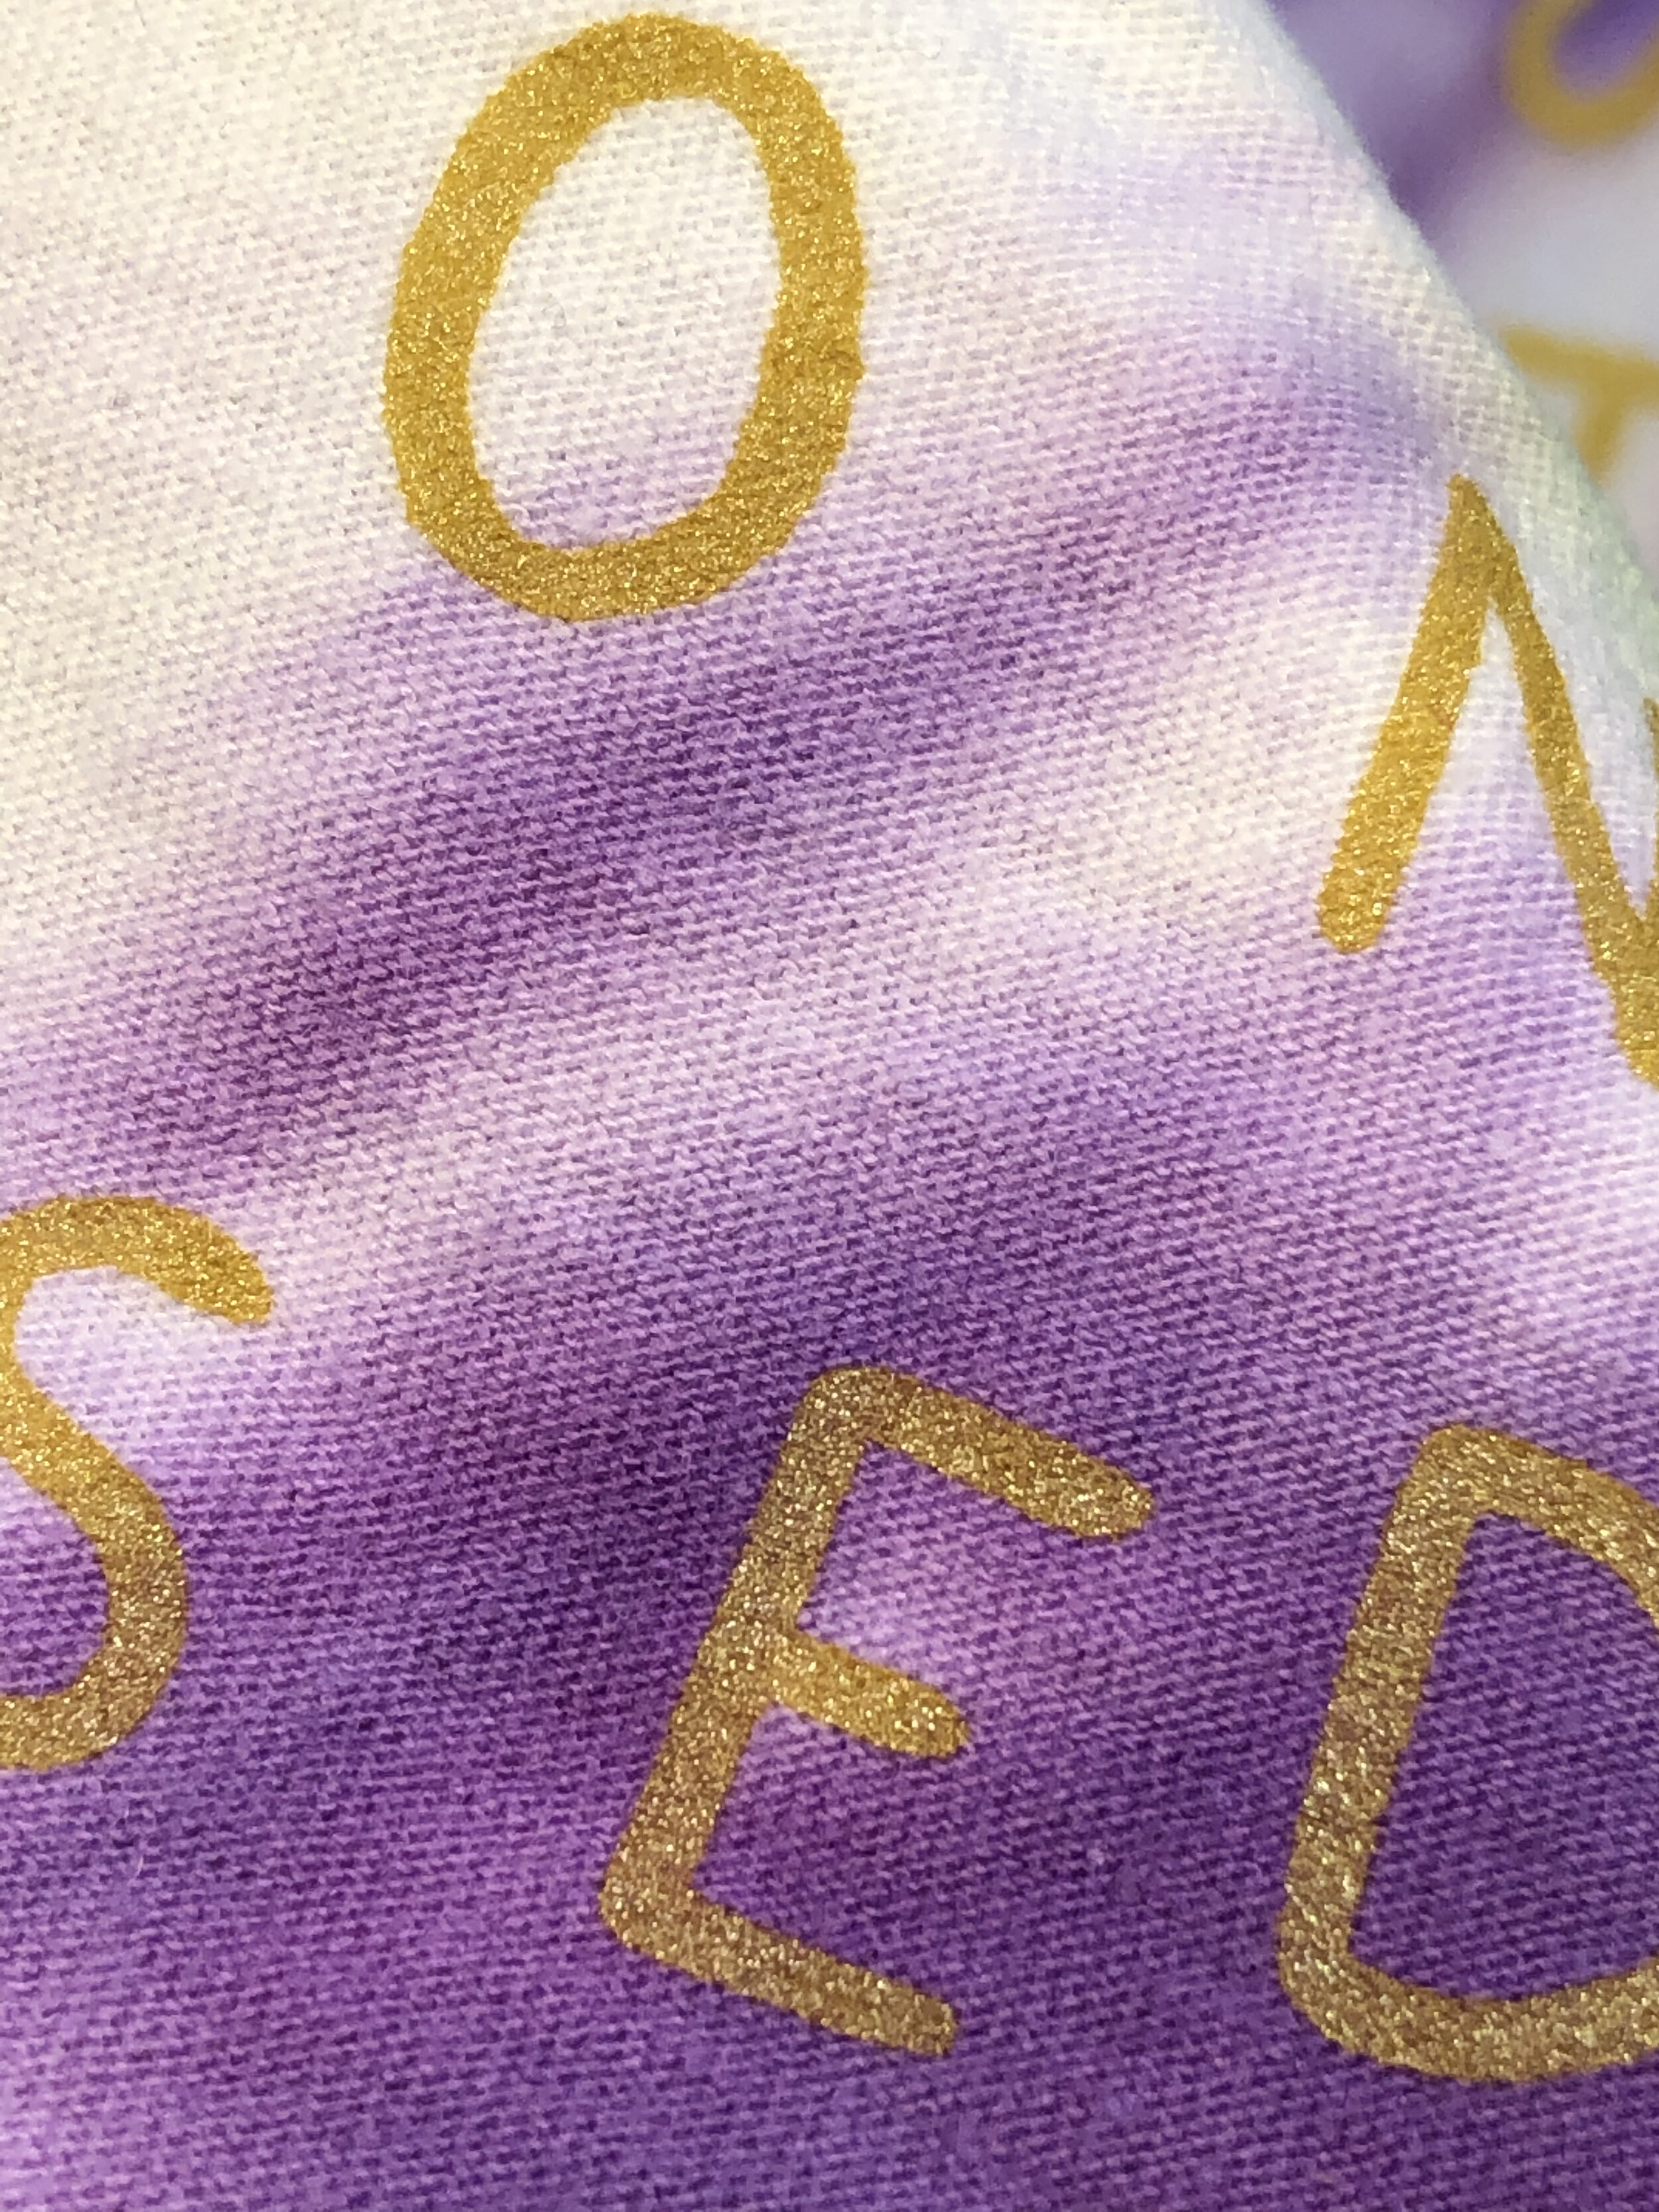  Close up of the metallic gold ink.  